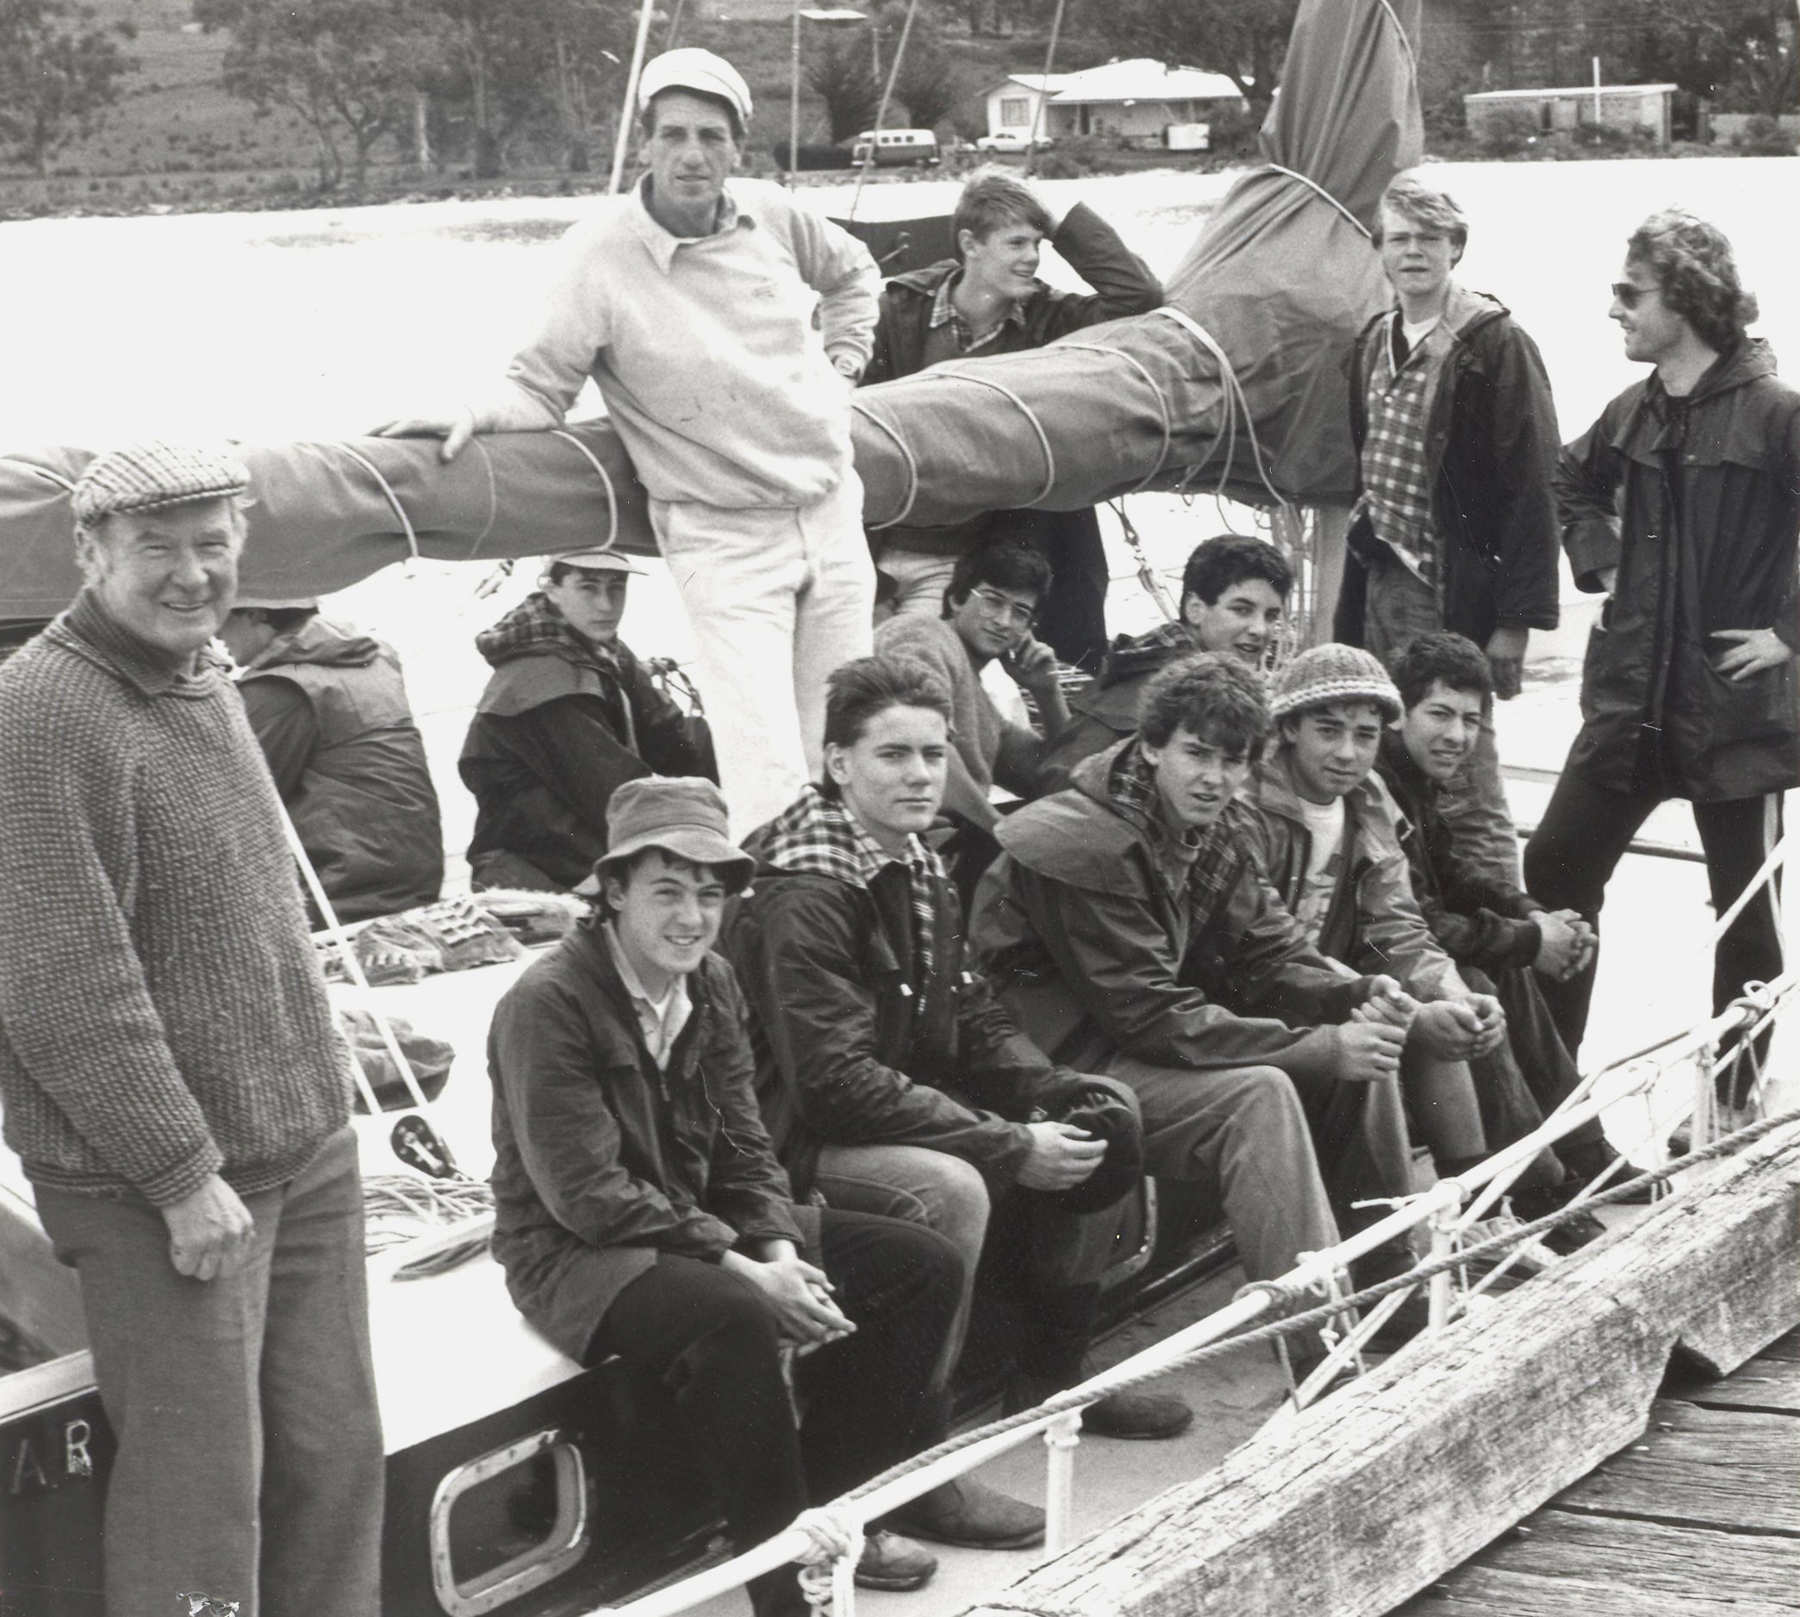 Mr Hay and Year 10 campers sailing, 1986.